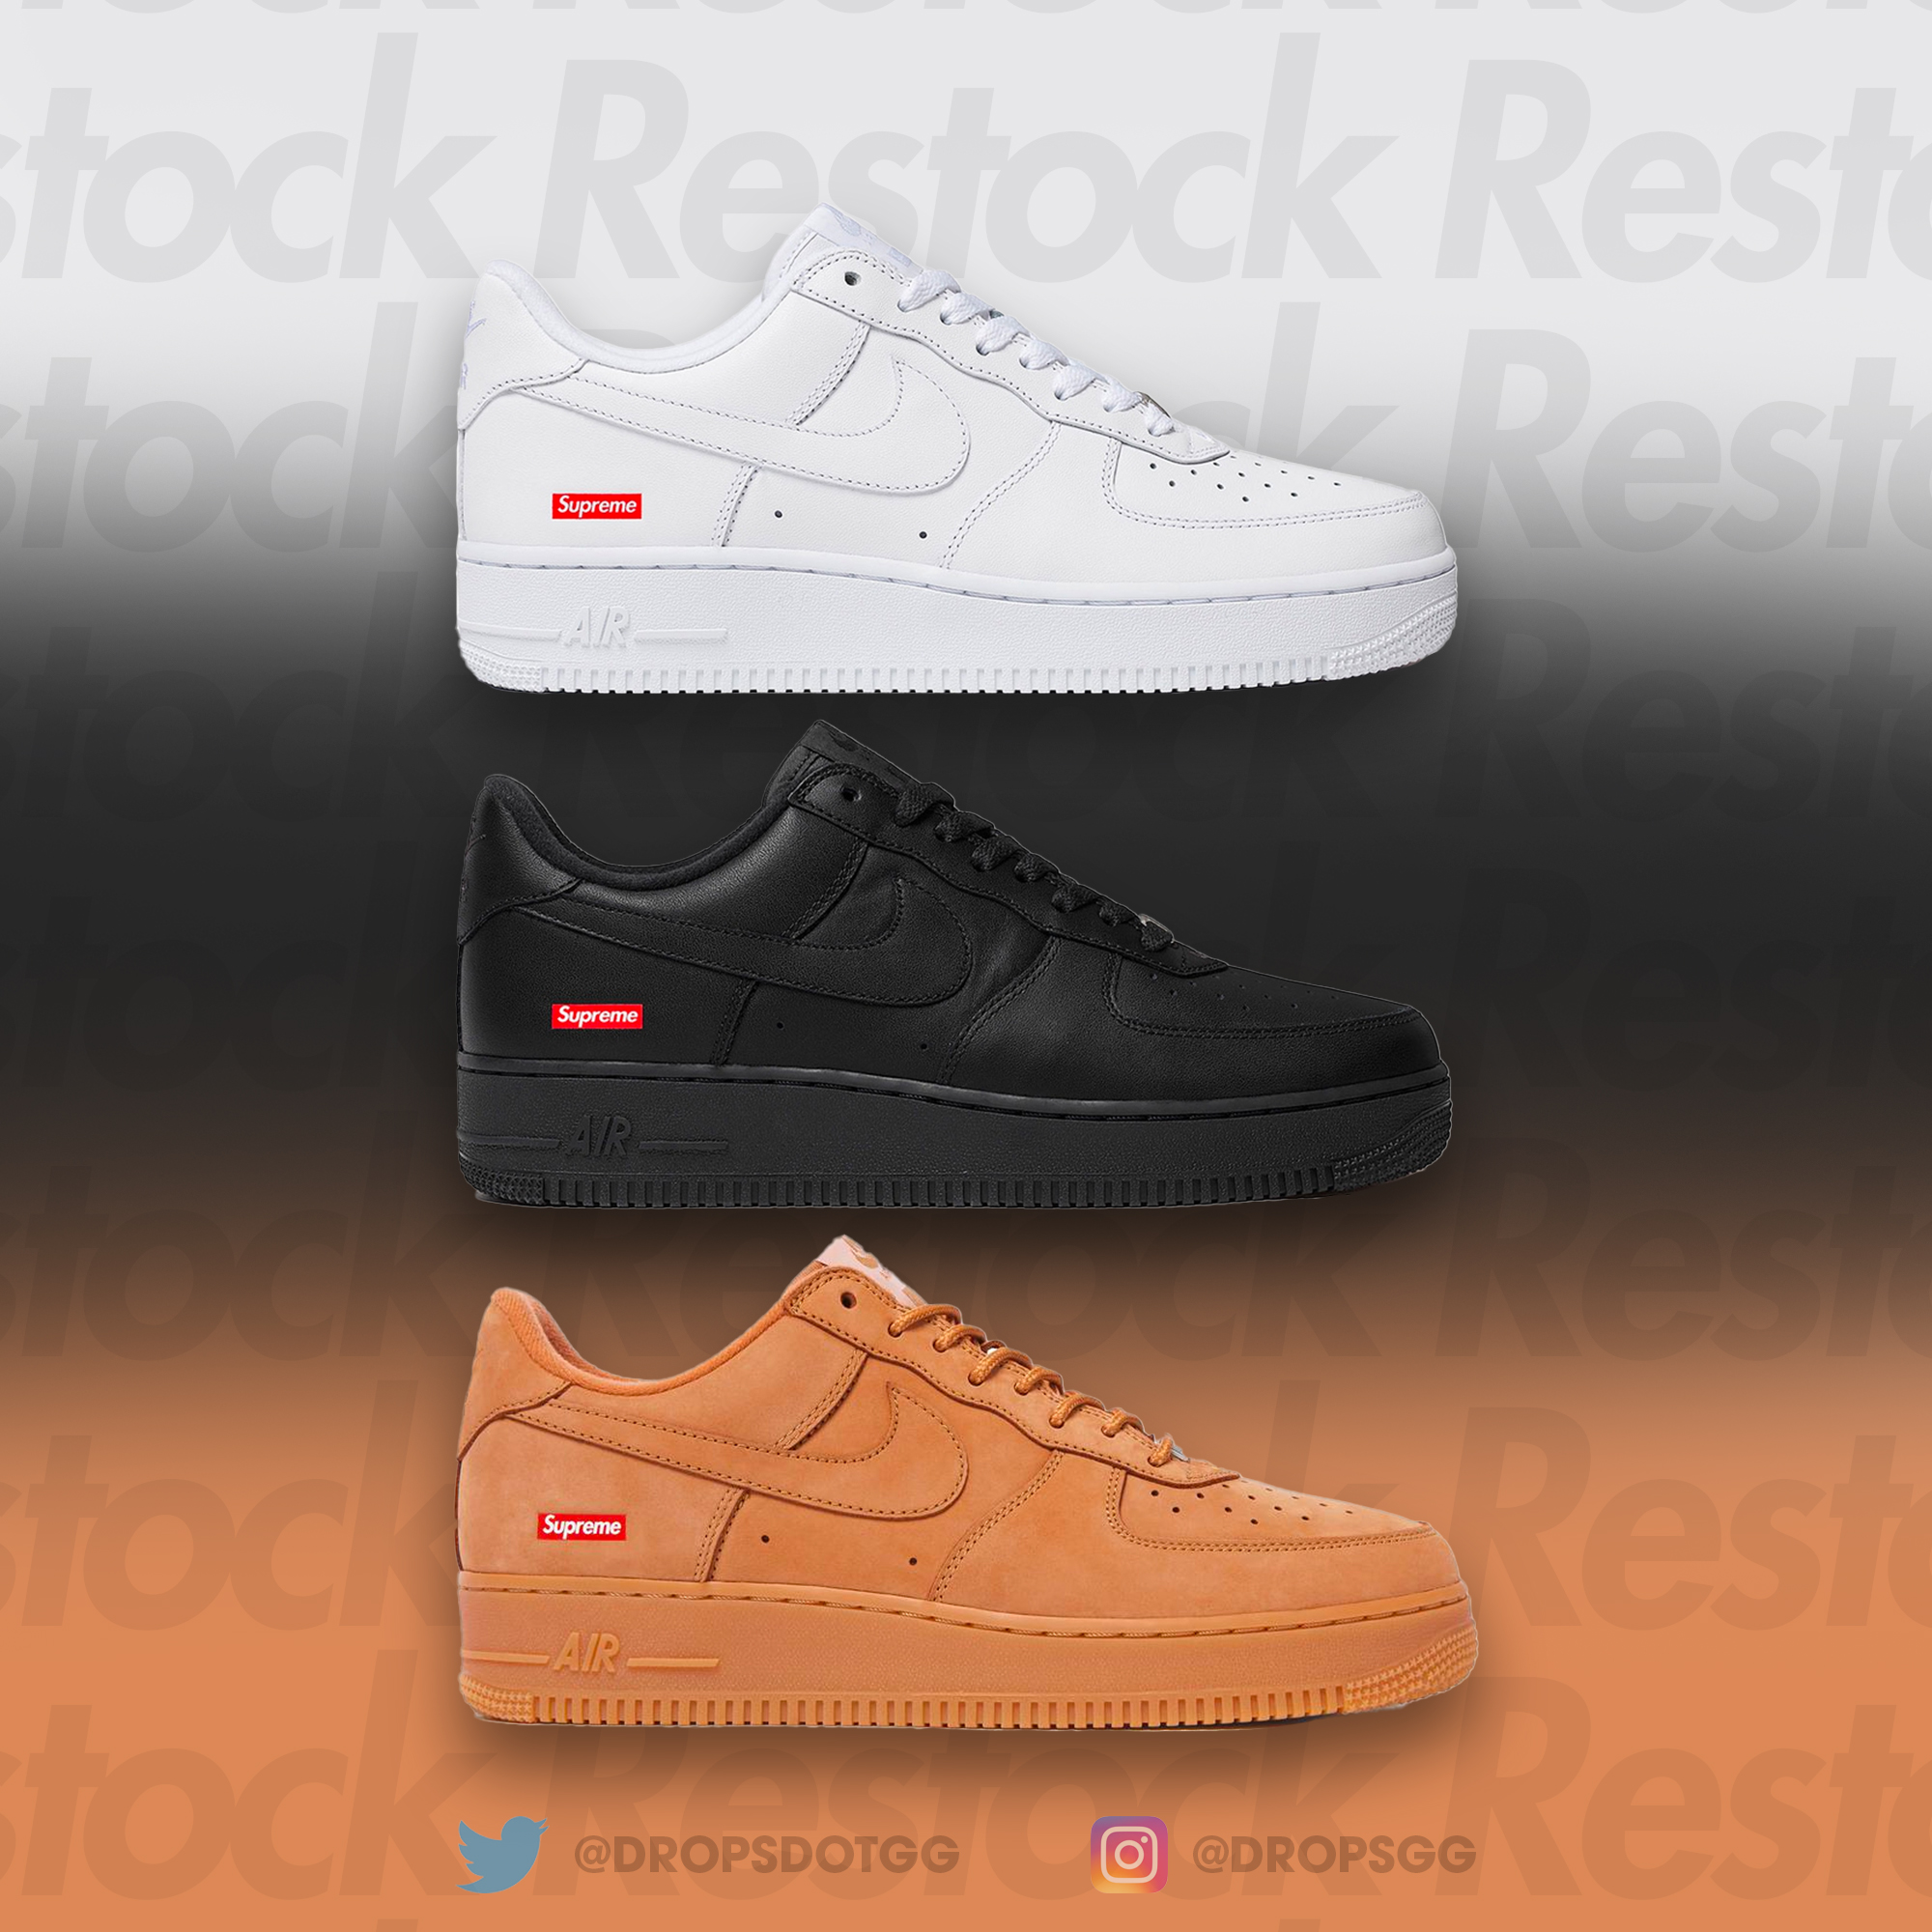 when are the supreme air forces restocking